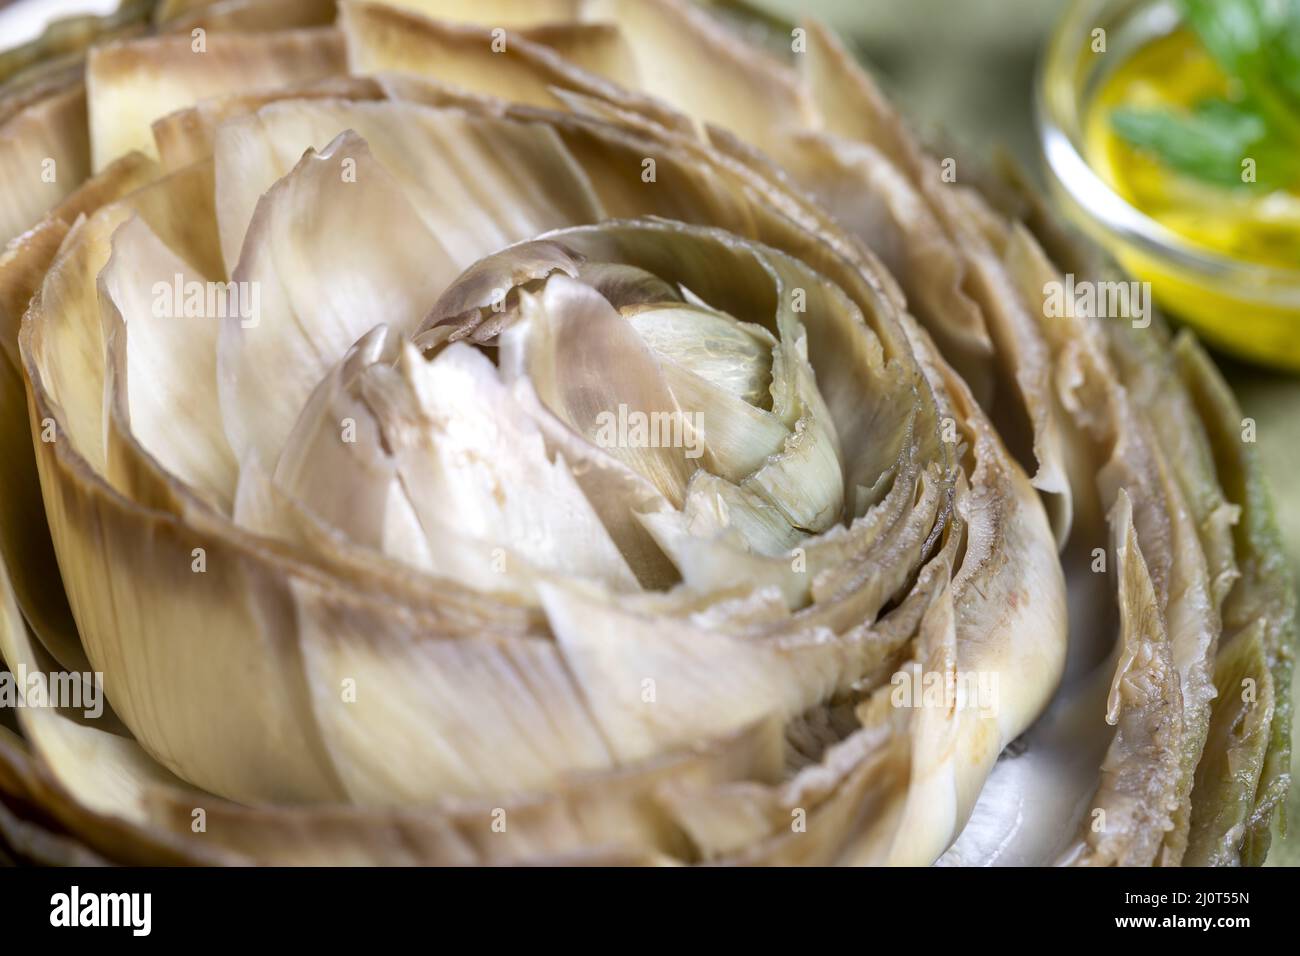 Cooked artichoke on a green plate Stock Photo